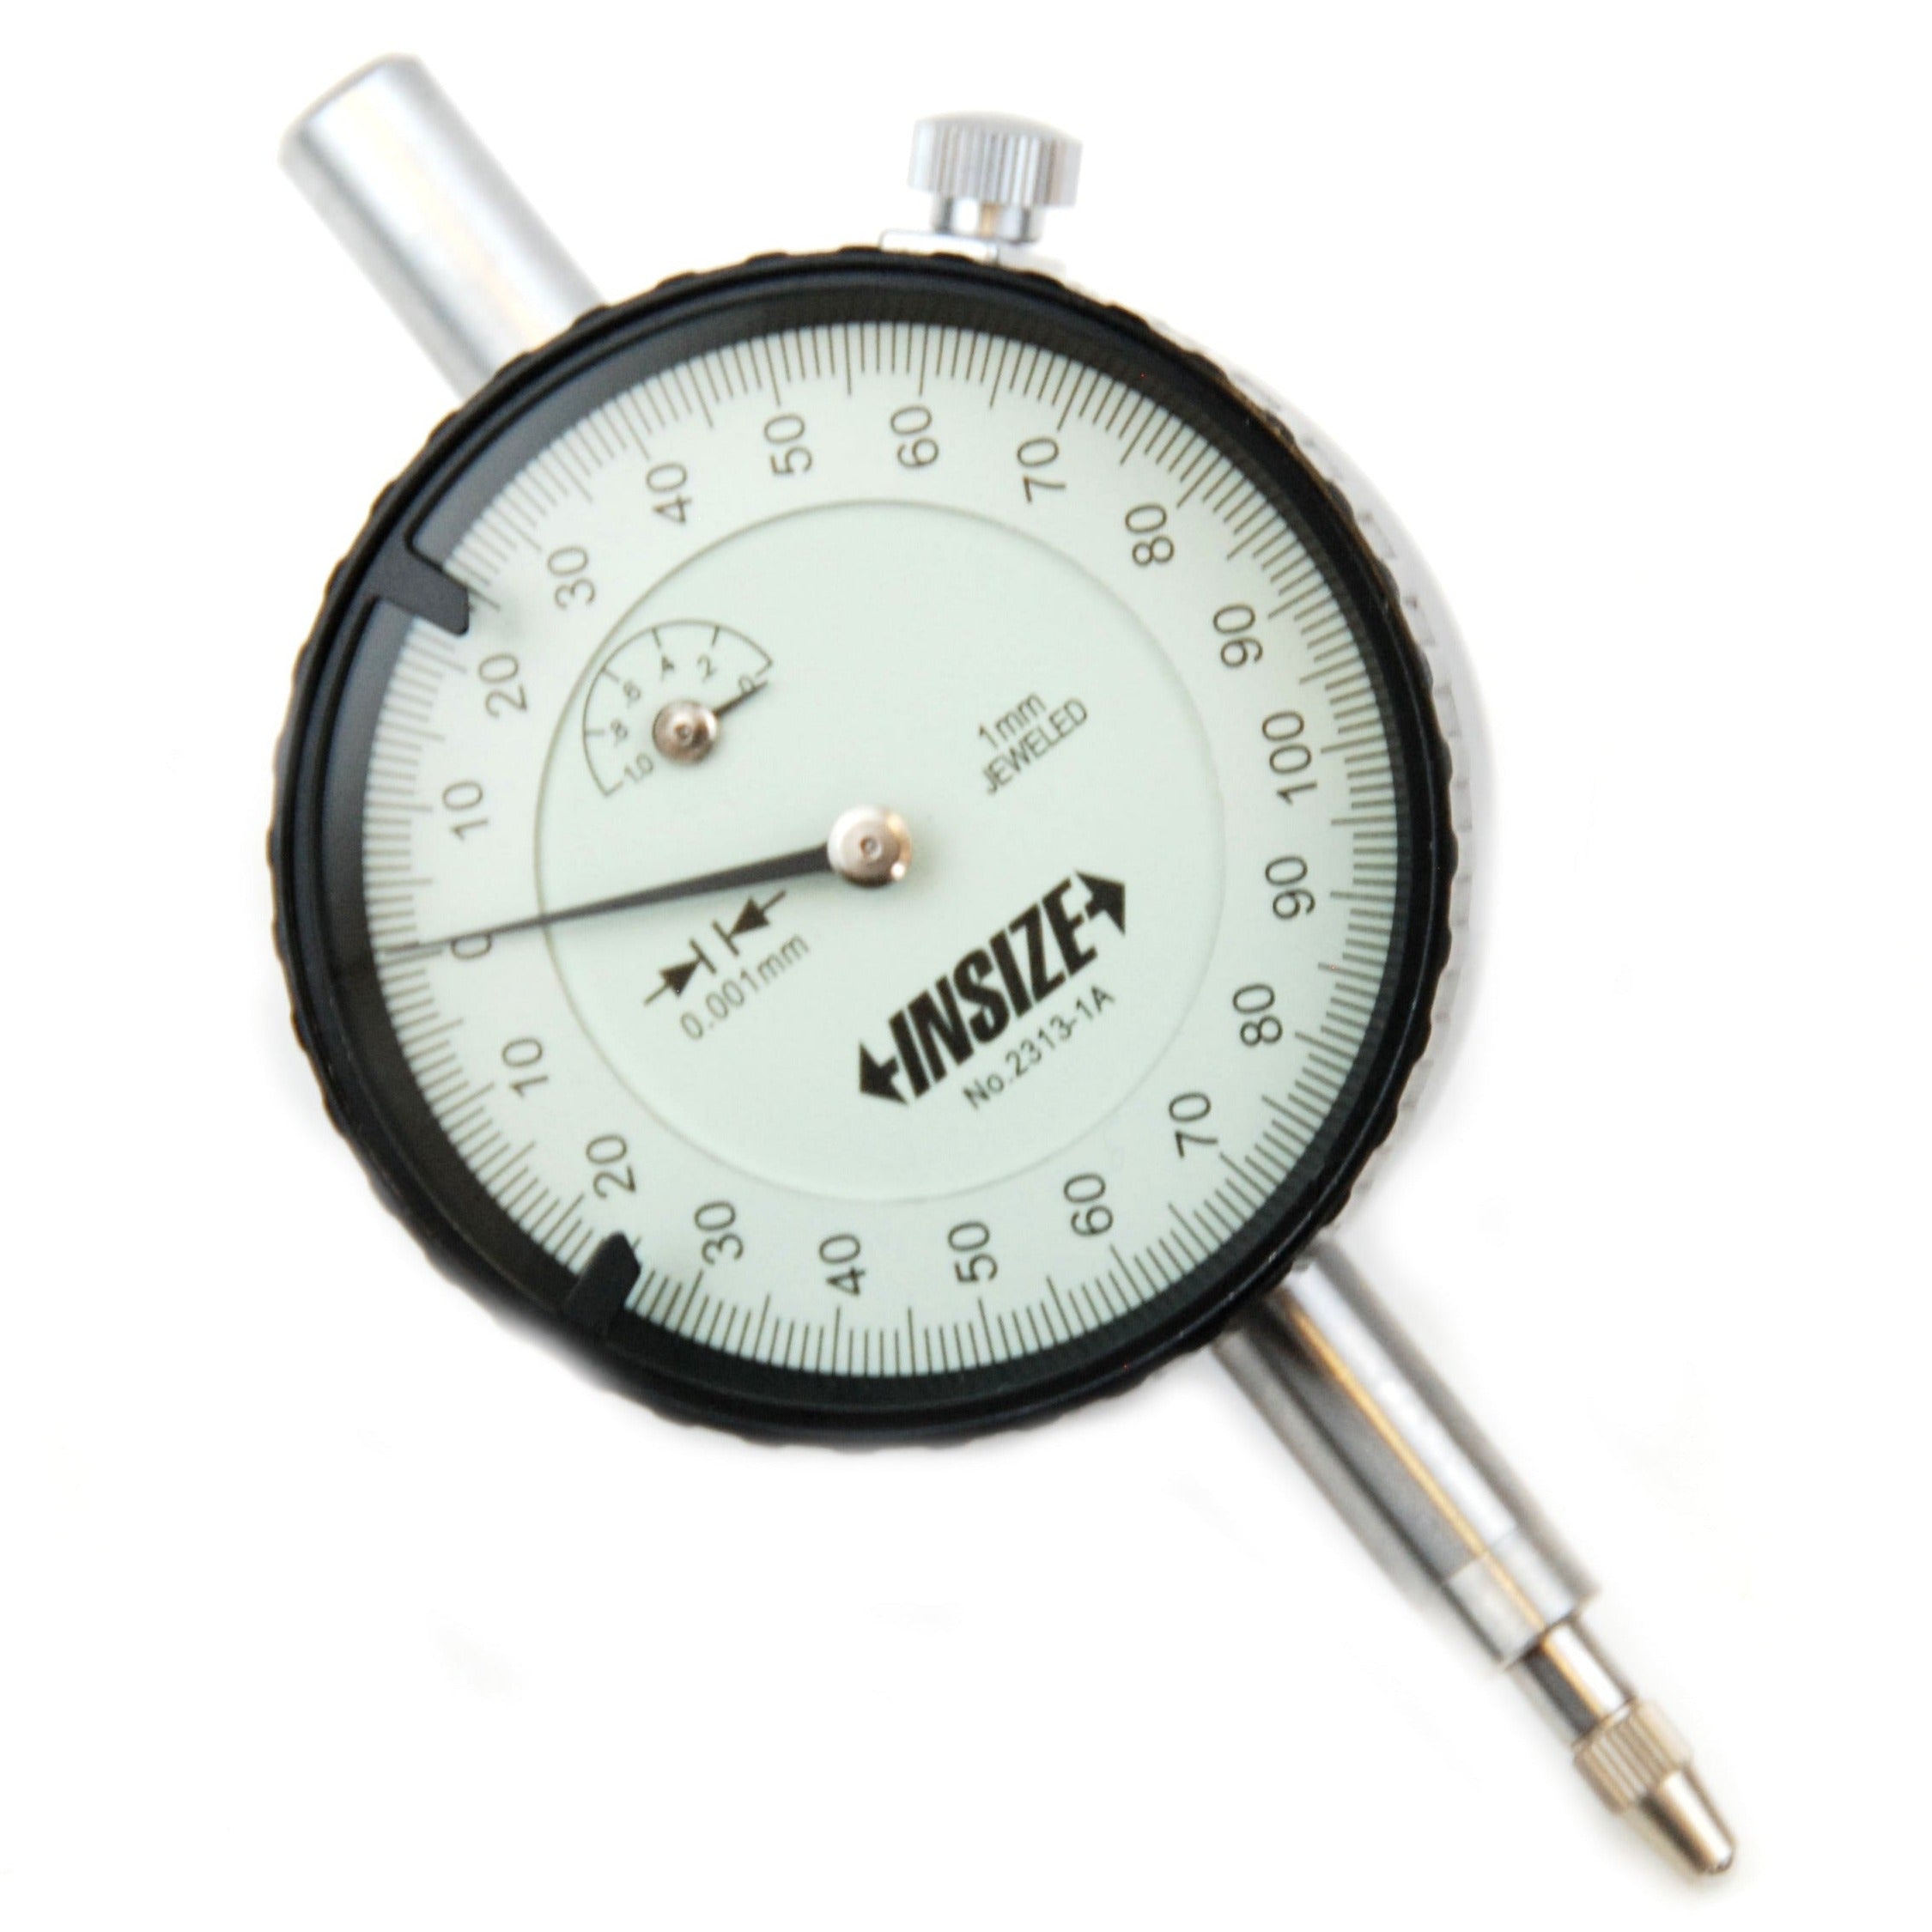 Insize Precision Dial Indicator 1mm Range Series 2313-1A